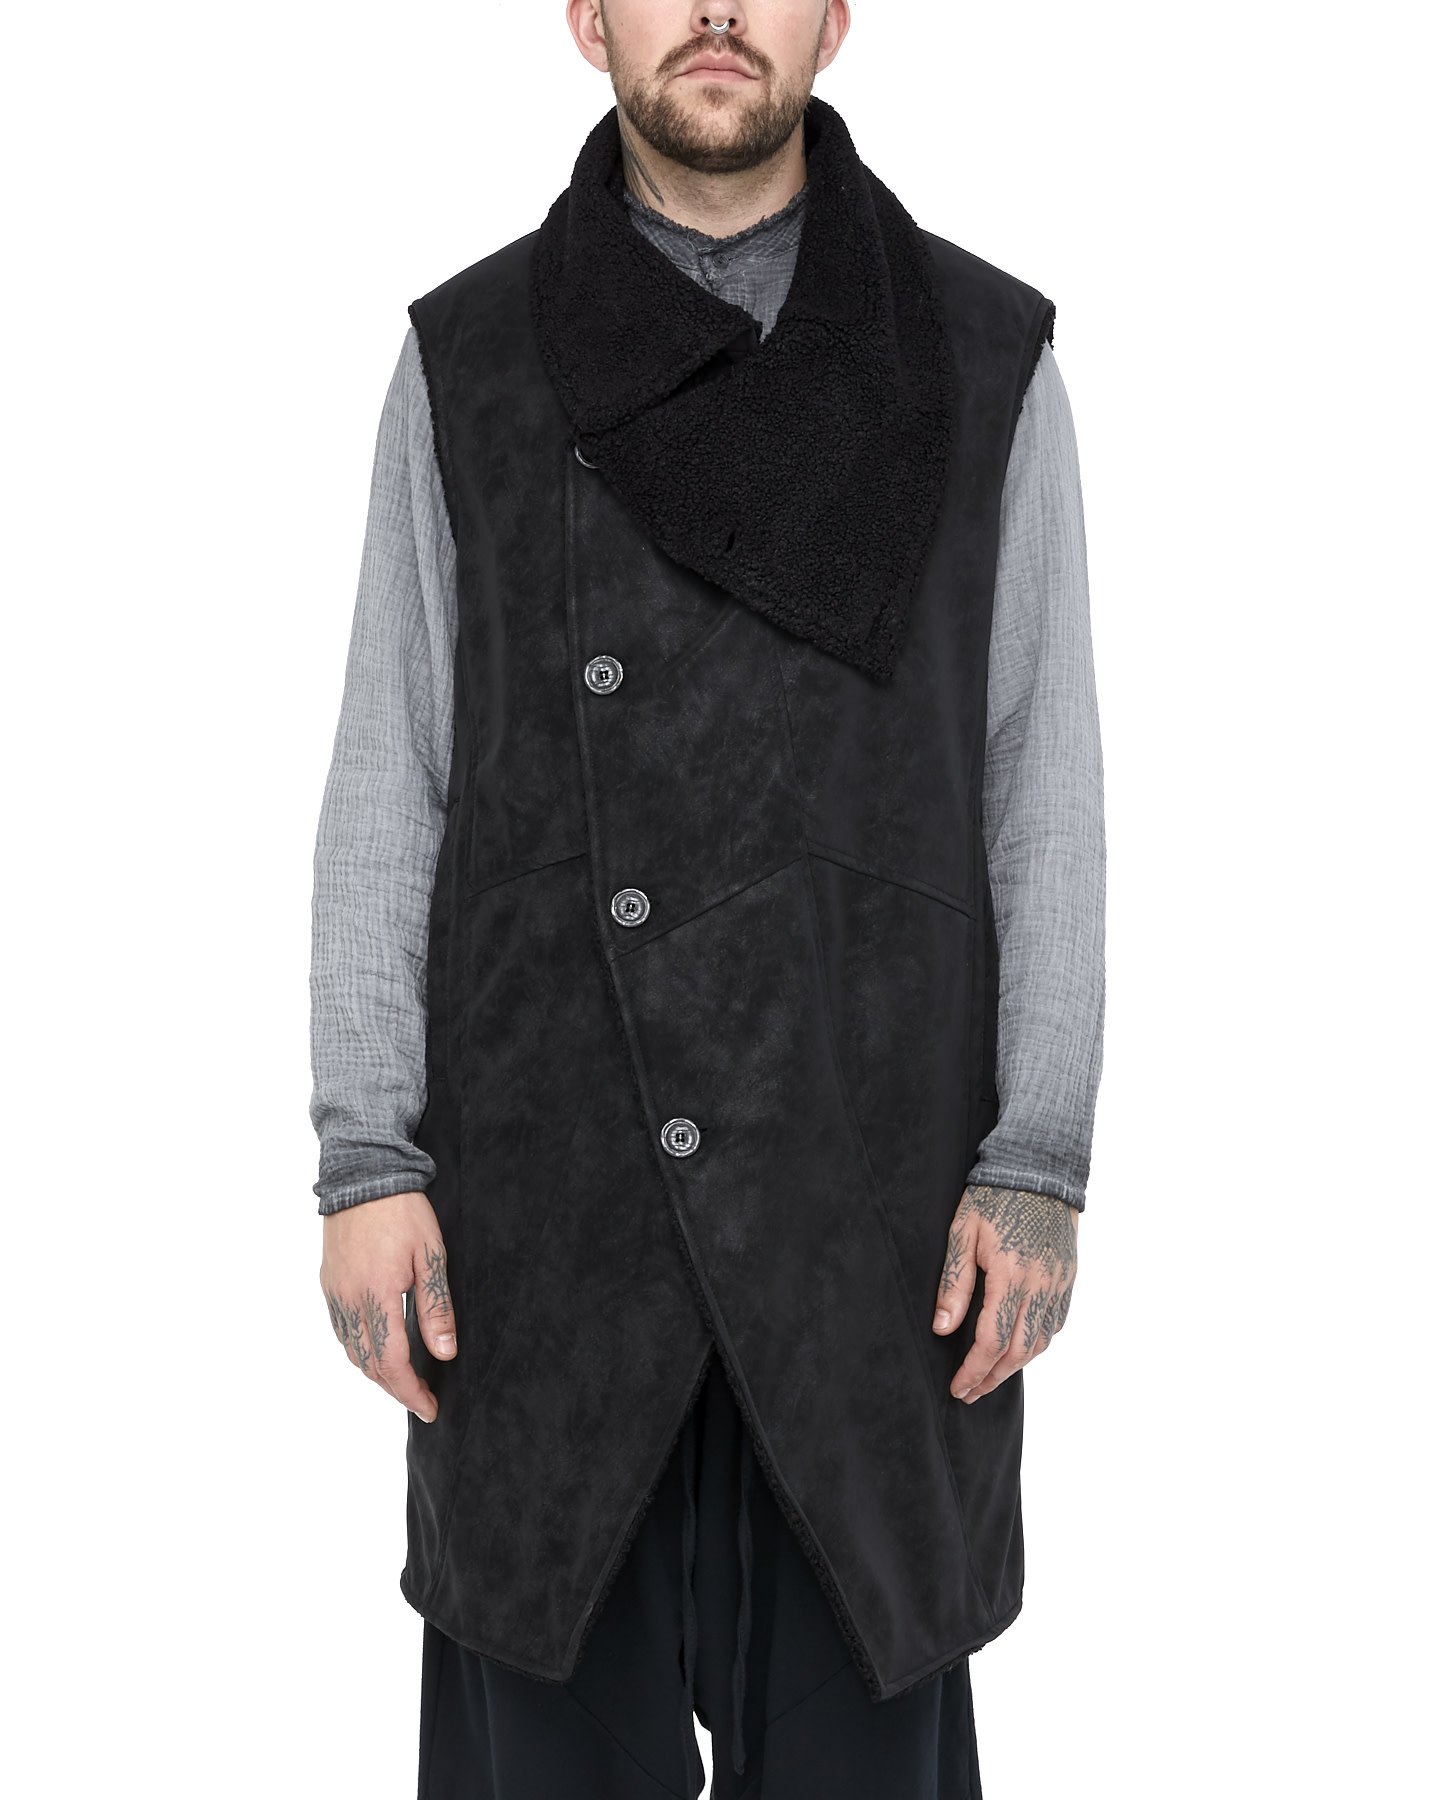 Padded Patch Pocket Vest by Thom Krom  Shop Untitled NYC - Shop Untitled  NYC